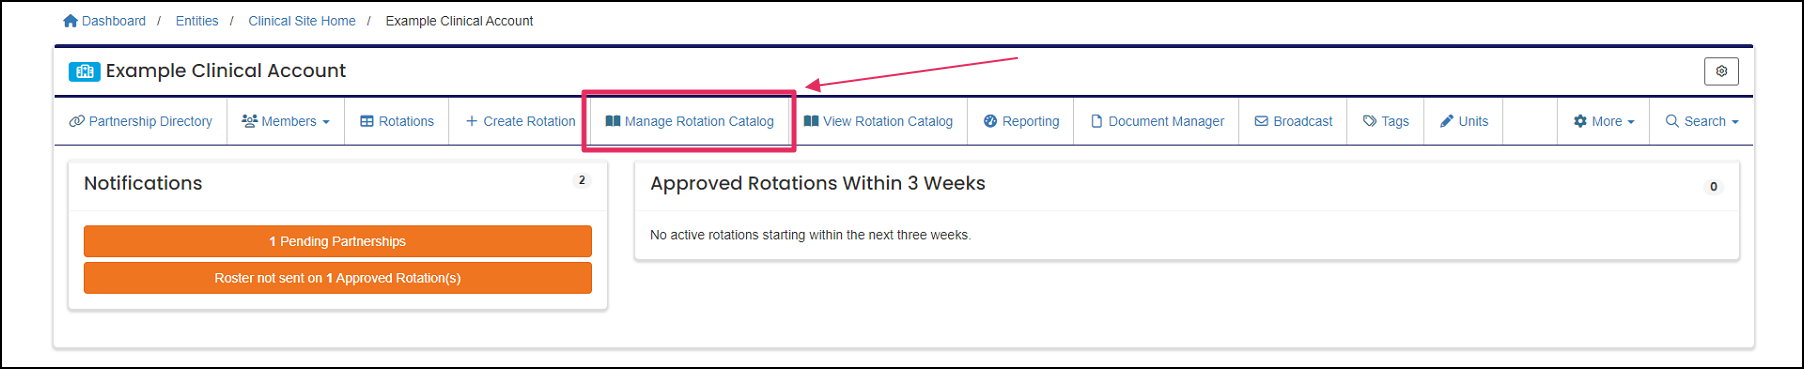 image Rotation Catalog button on Clinical Site home page.